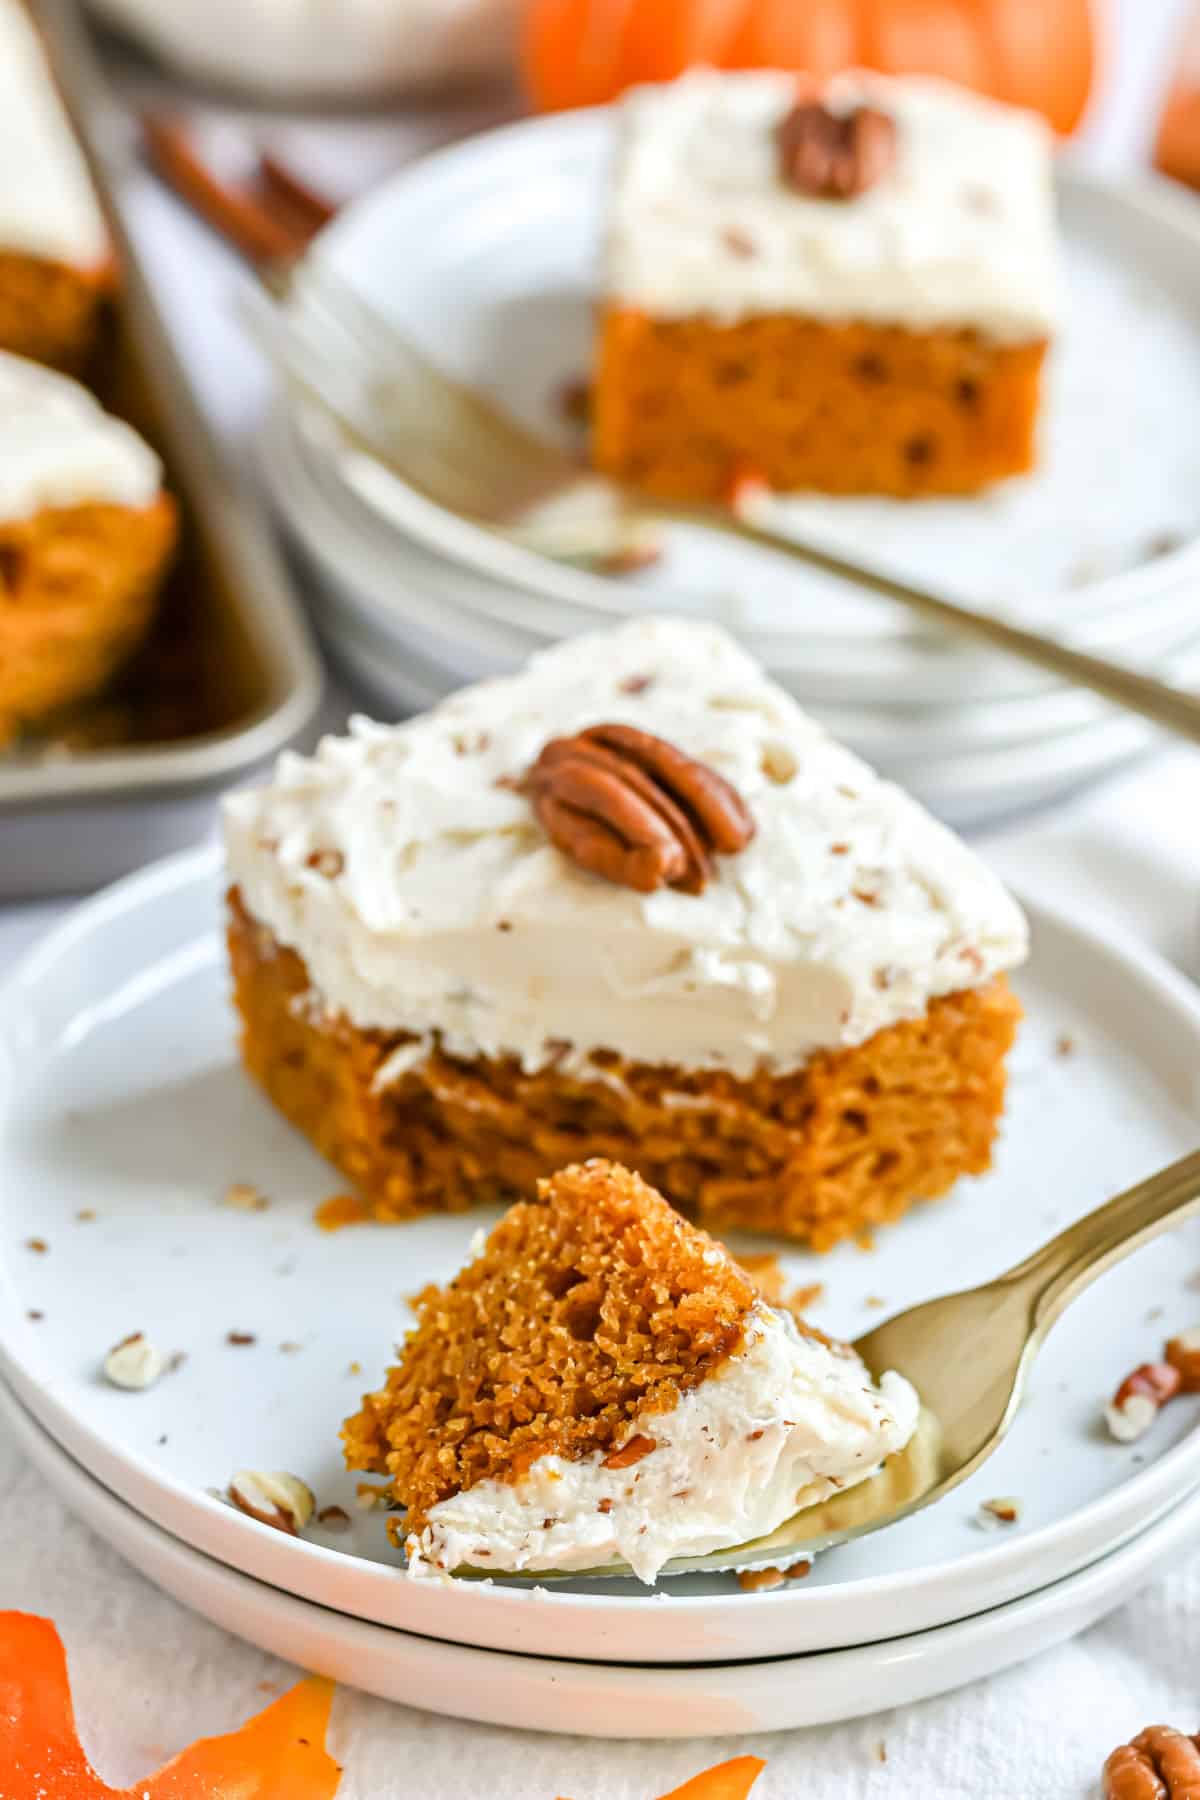 Pumpkin bar with cream cheese frosting on a plate with a bite taken out.